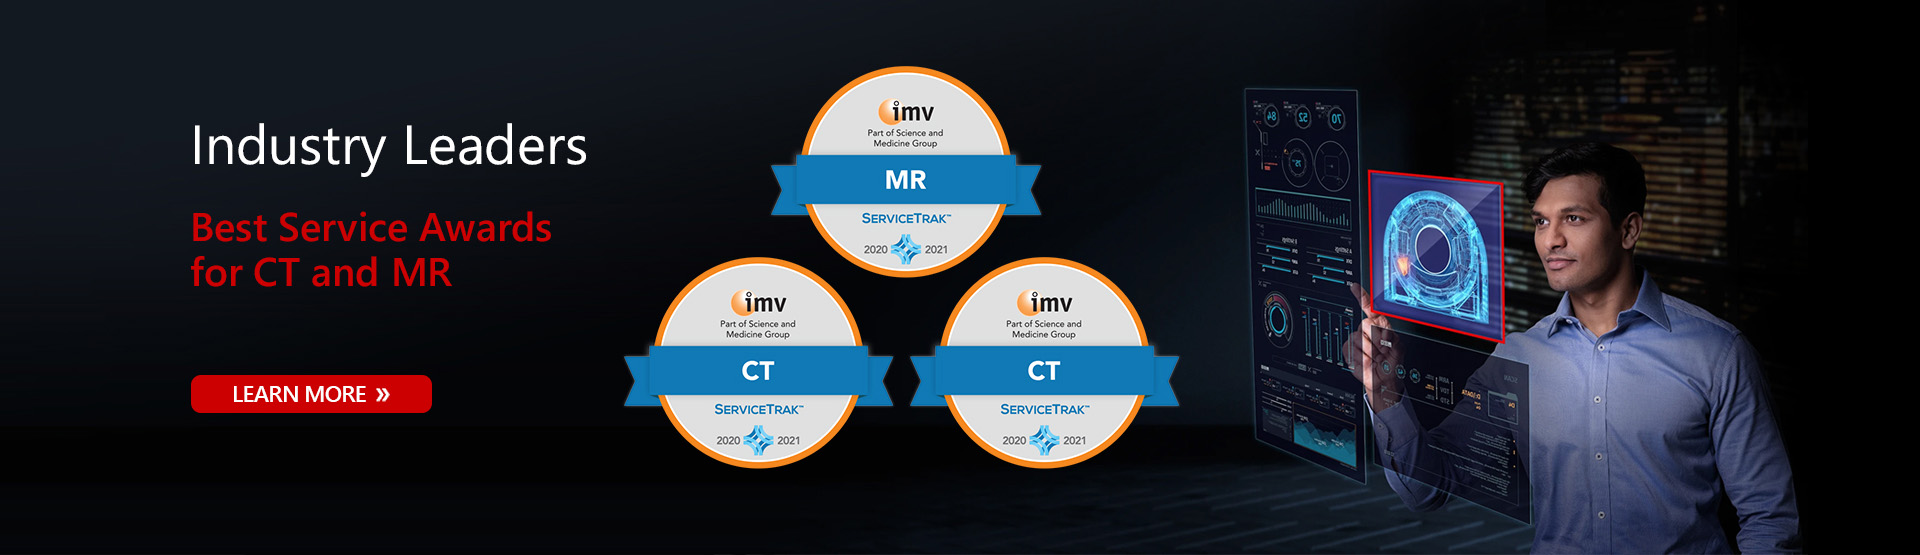 Industry Leaders | Best Service Awards for CT, MR, and RF | Learn More